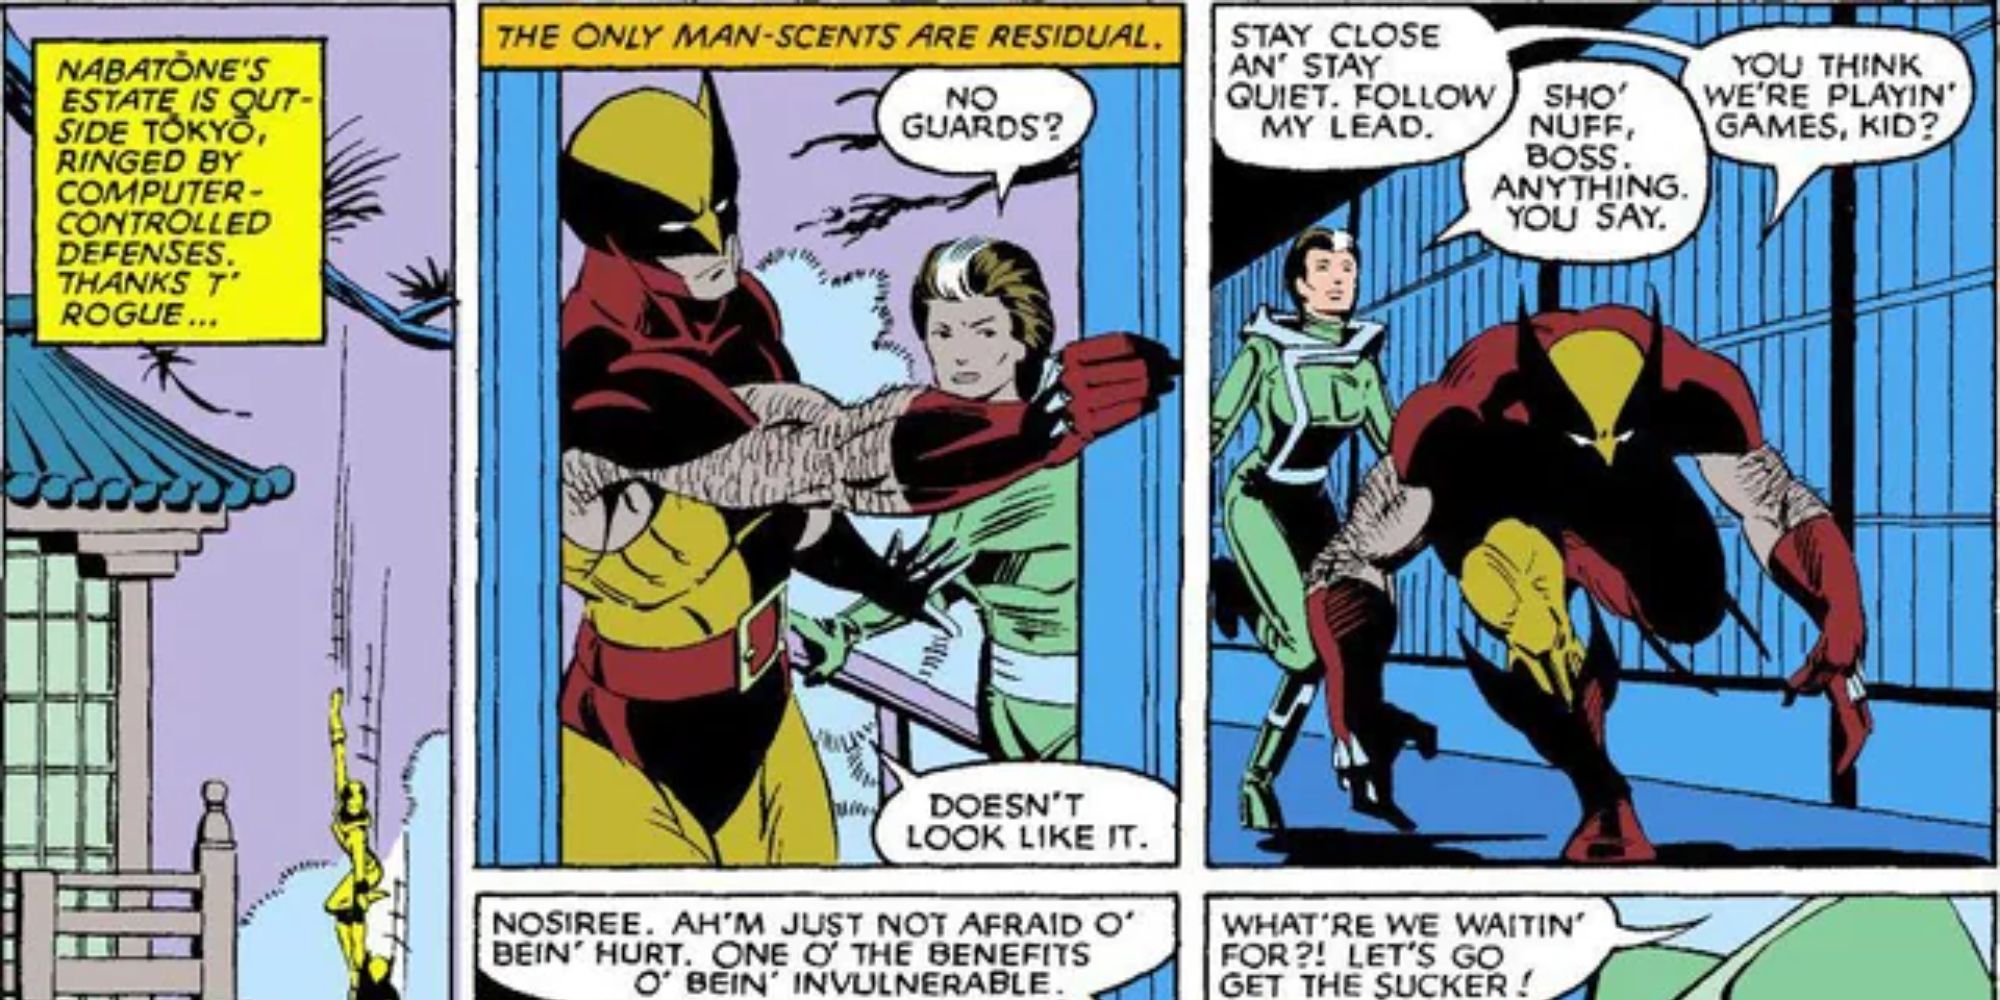 Rogue and Wolverine on a mission in the comics